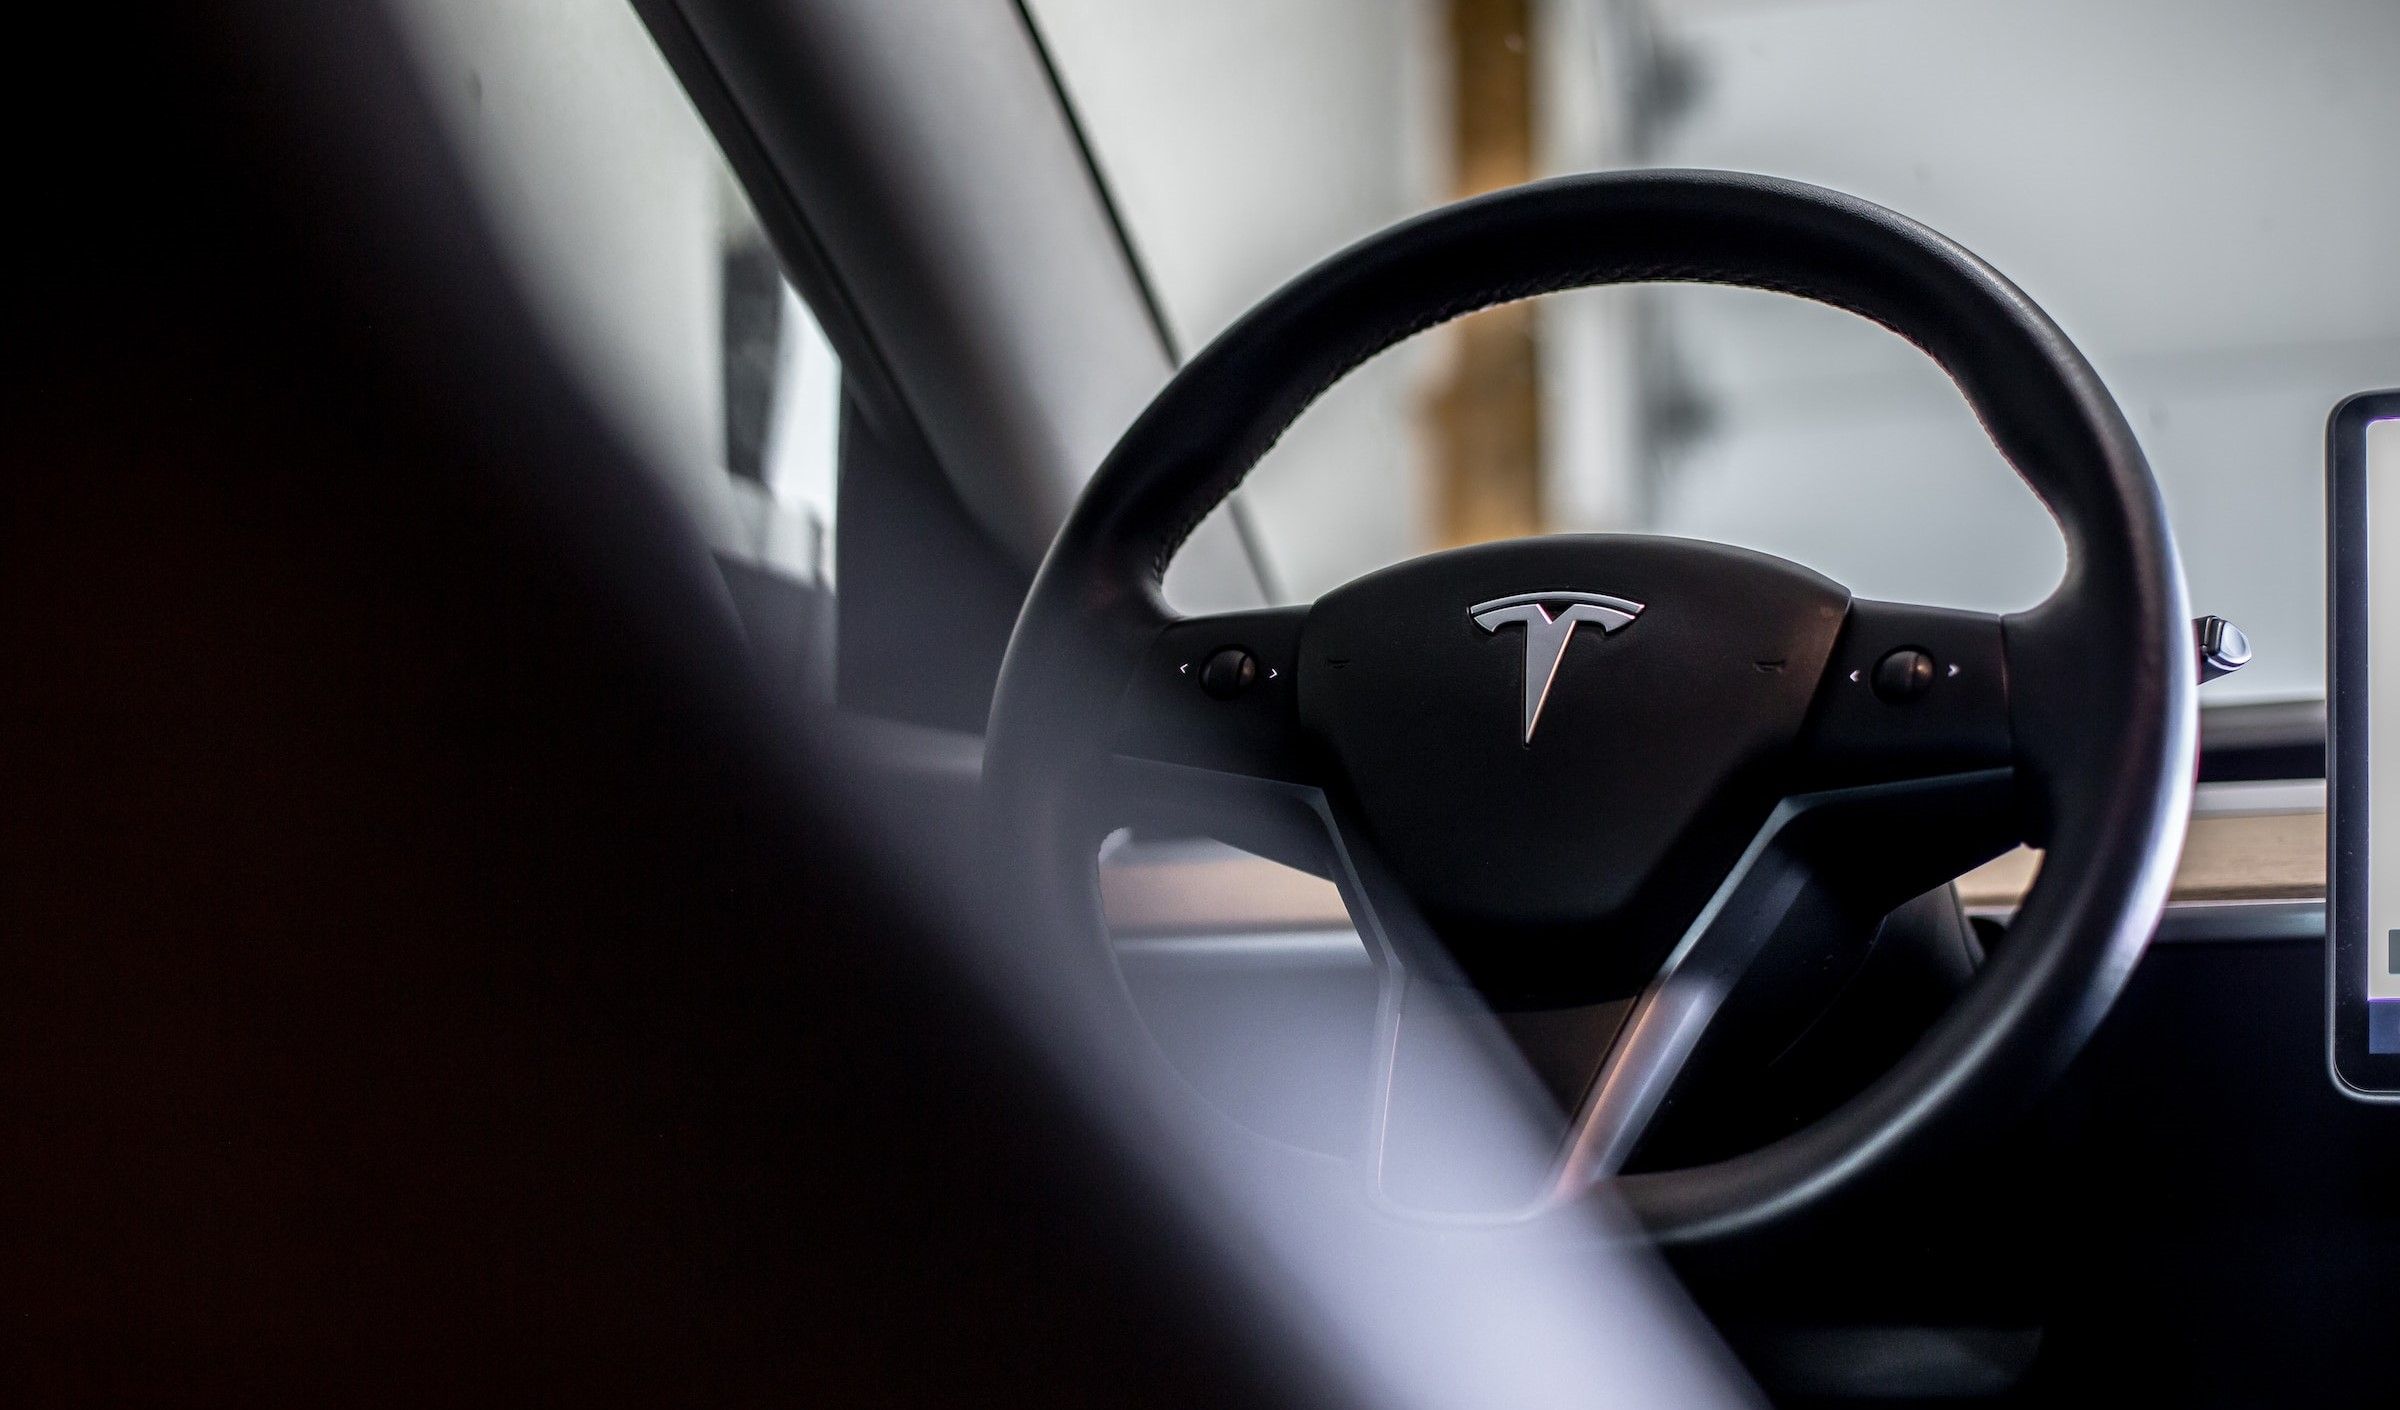 Tesla issues recall for nearly 16,000 vehicles due to seat belt